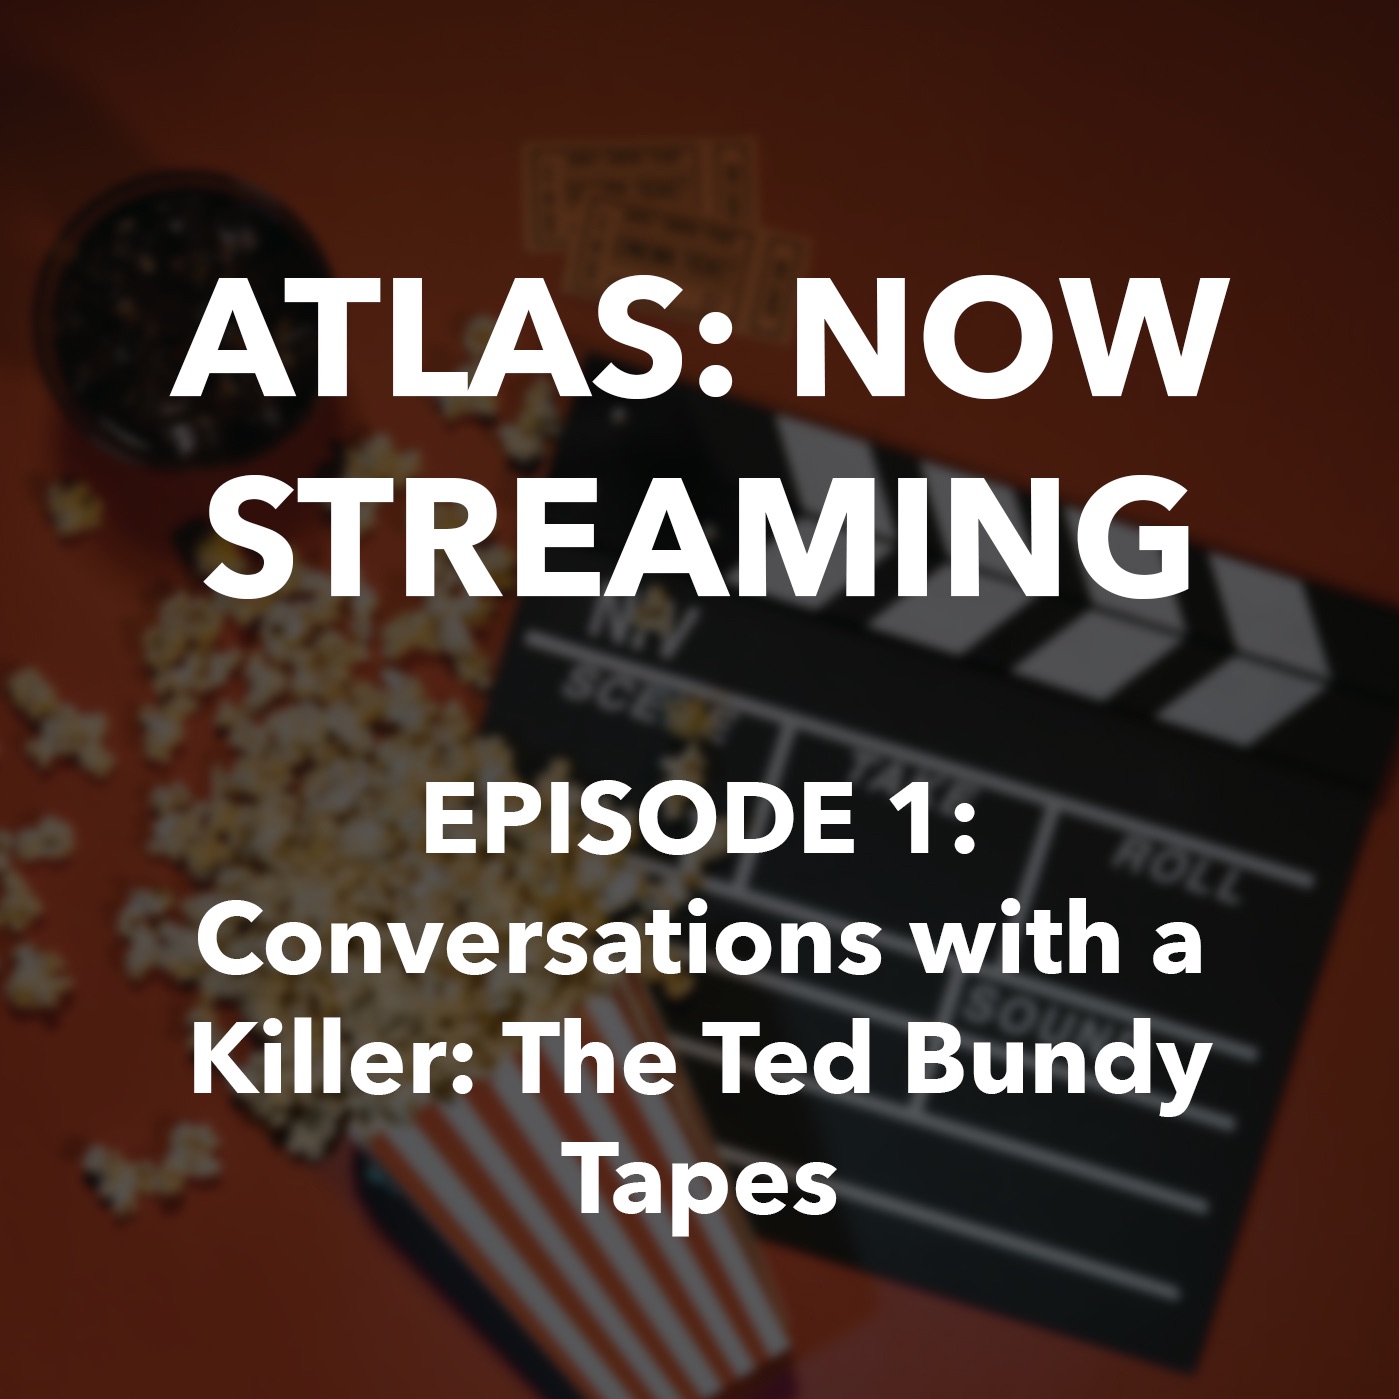 Atlas: Now Streaming Episode 1 - Conversations with a Killer: The Ted Bundy Tapes